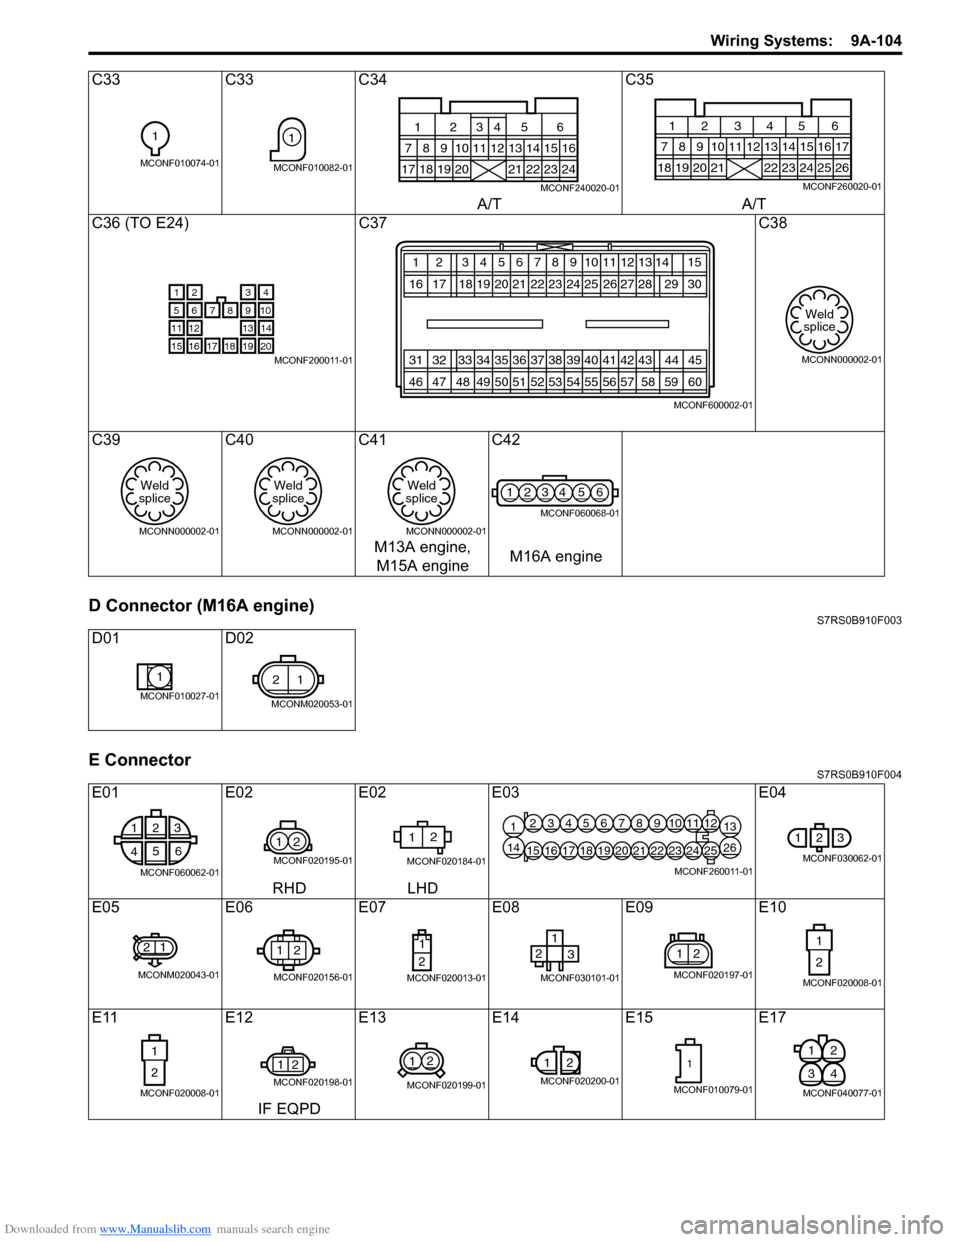 SUZUKI SWIFT 2005 2.G Service Workshop Manual Downloaded from www.Manualslib.com manuals search engine Wiring Systems:  9A-104
D Connector (M16A engine)S7RS0B910F003
E ConnectorS7RS0B910F004
C33C33C34 C35
A/T A/T
C36 (TO E24) C37 C38
C39 C40C41 C